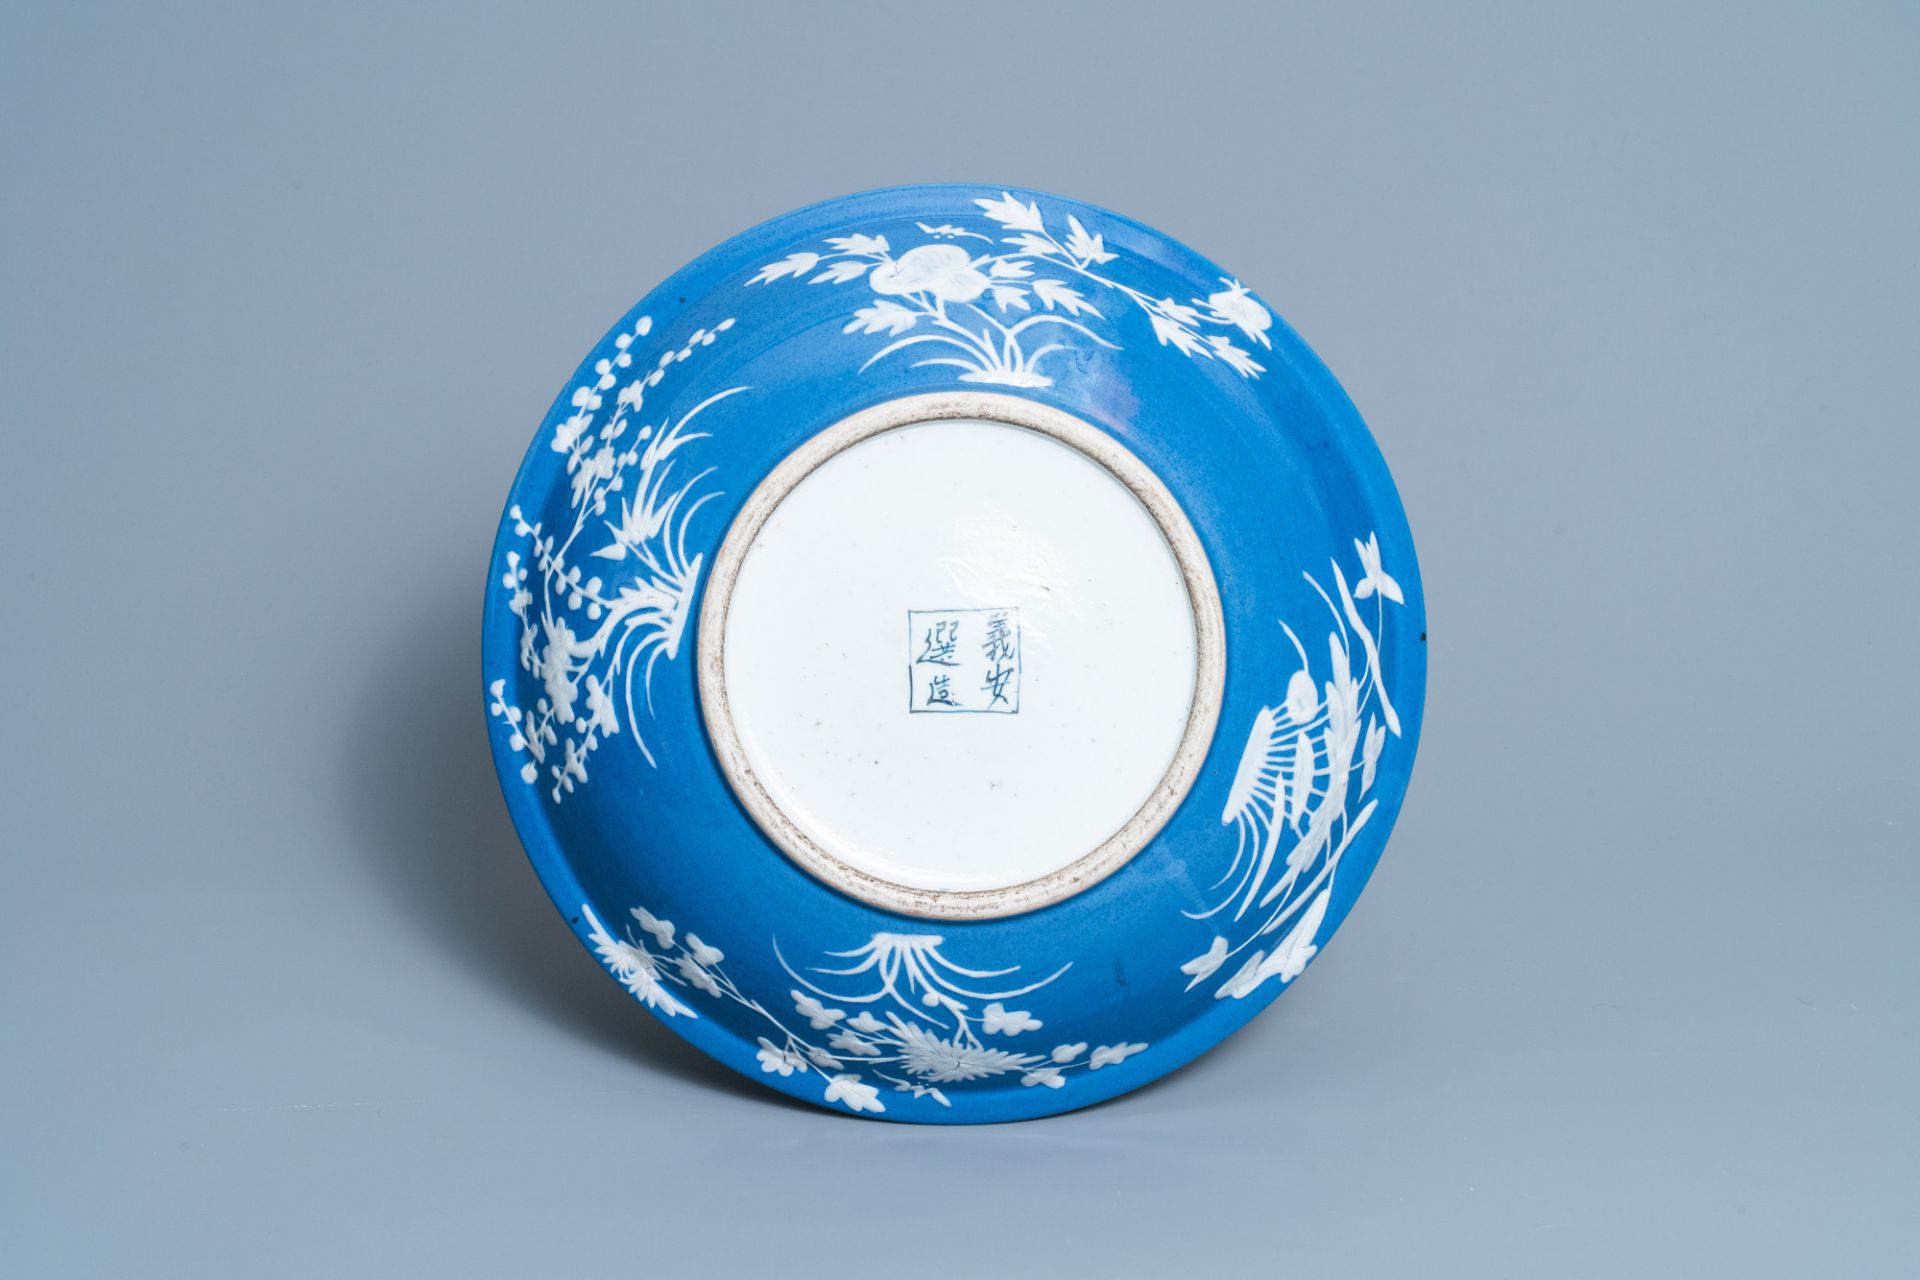 A varied collection of Chinese porcelain, 19/20th C. - Image 3 of 11